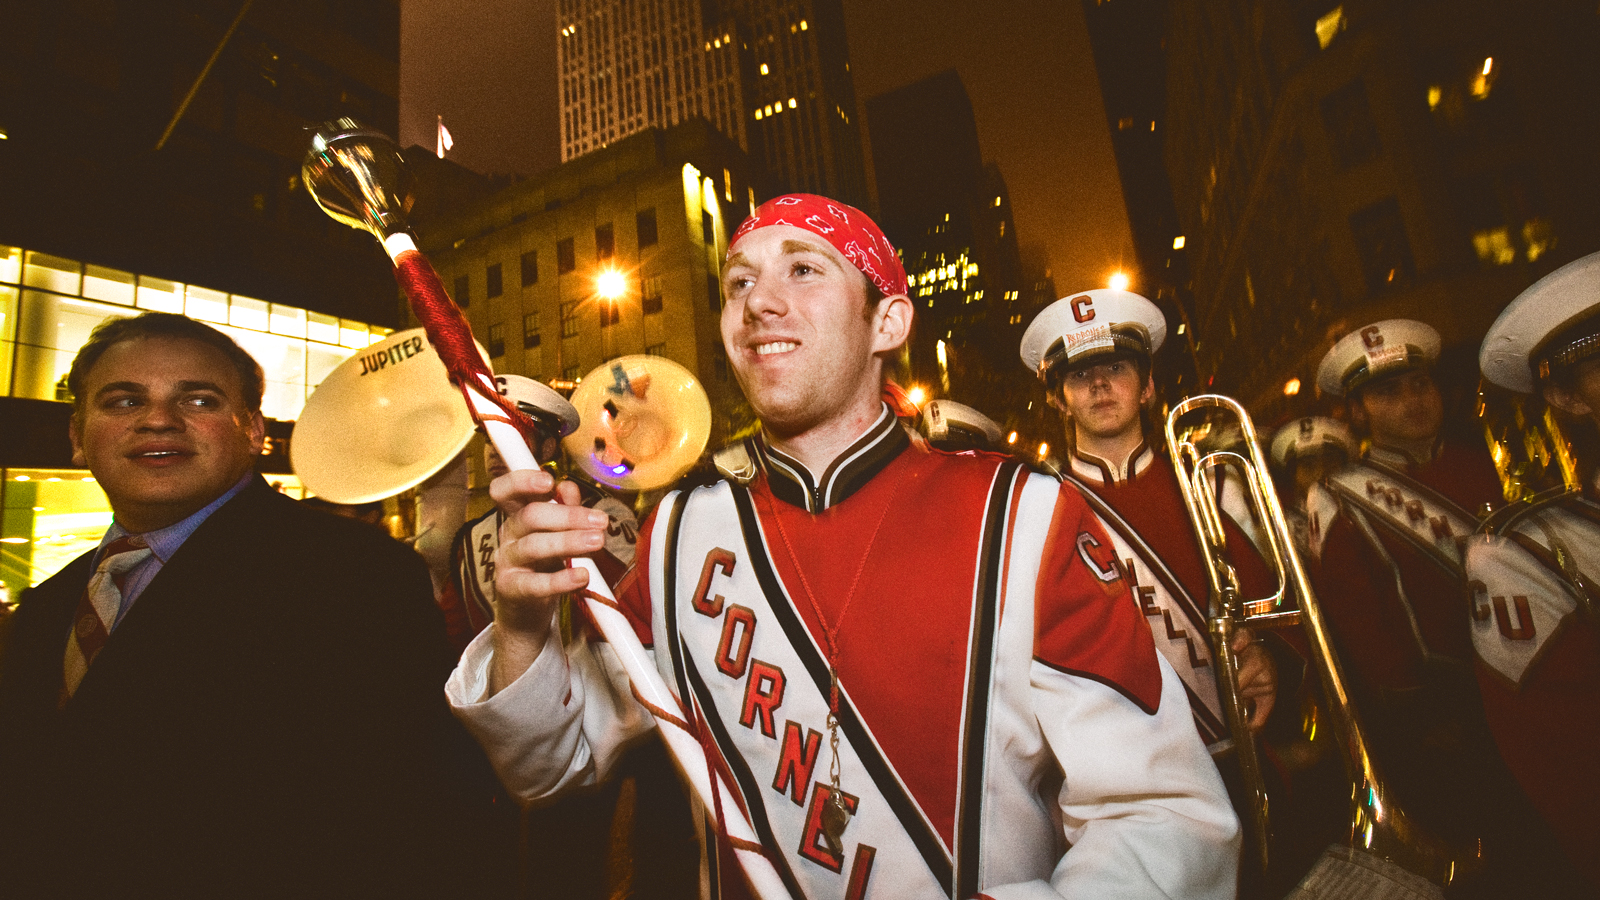 Cornell band members march in New York City in the Sy Katz Parade